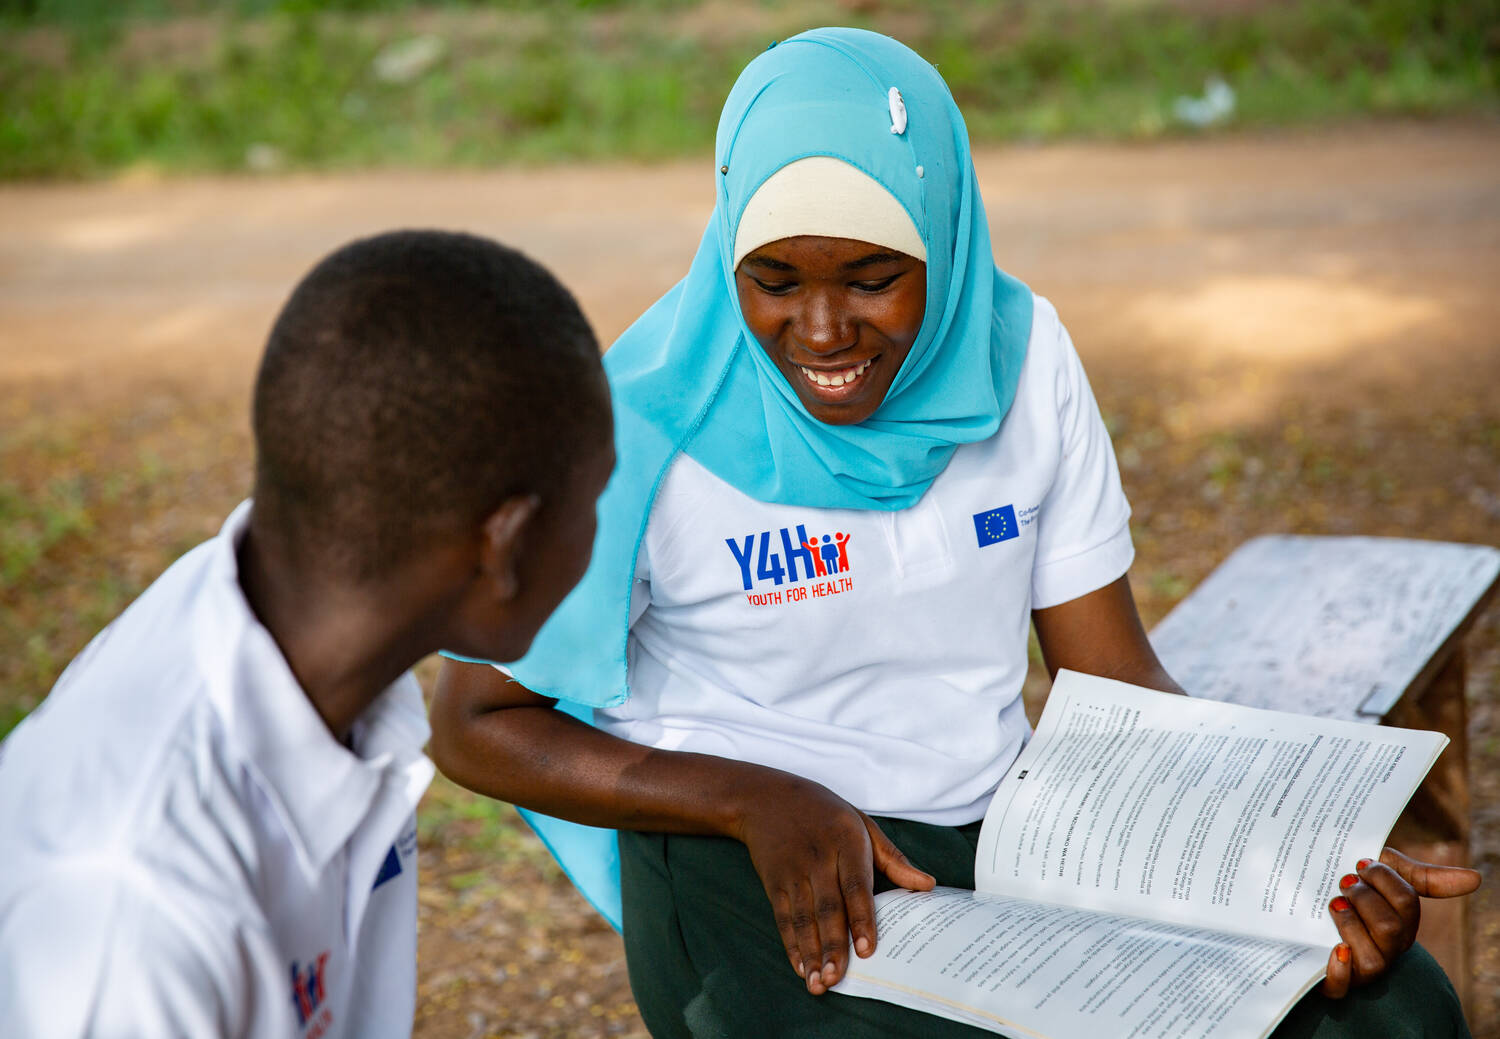 Youth for Health launches in Kenya: helping adolescents access reproductive health & rights